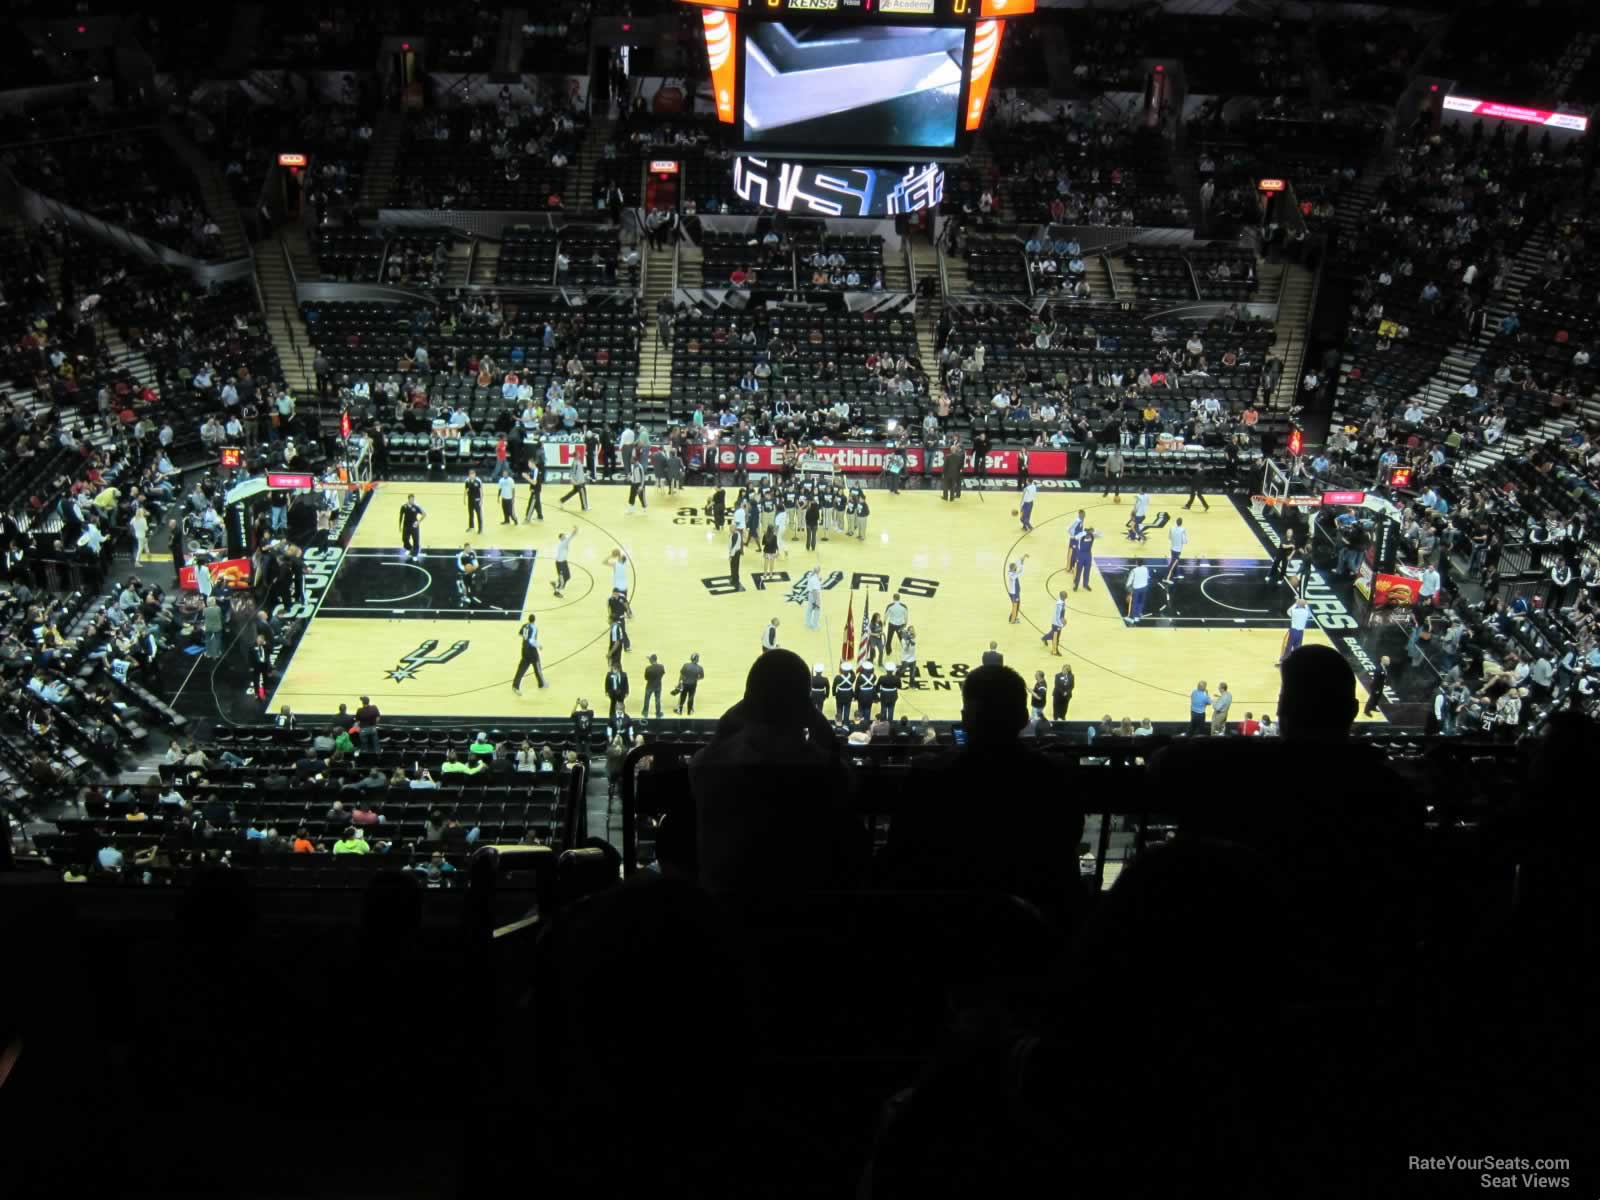 section 224, row 7 seat view  for basketball - at&t center